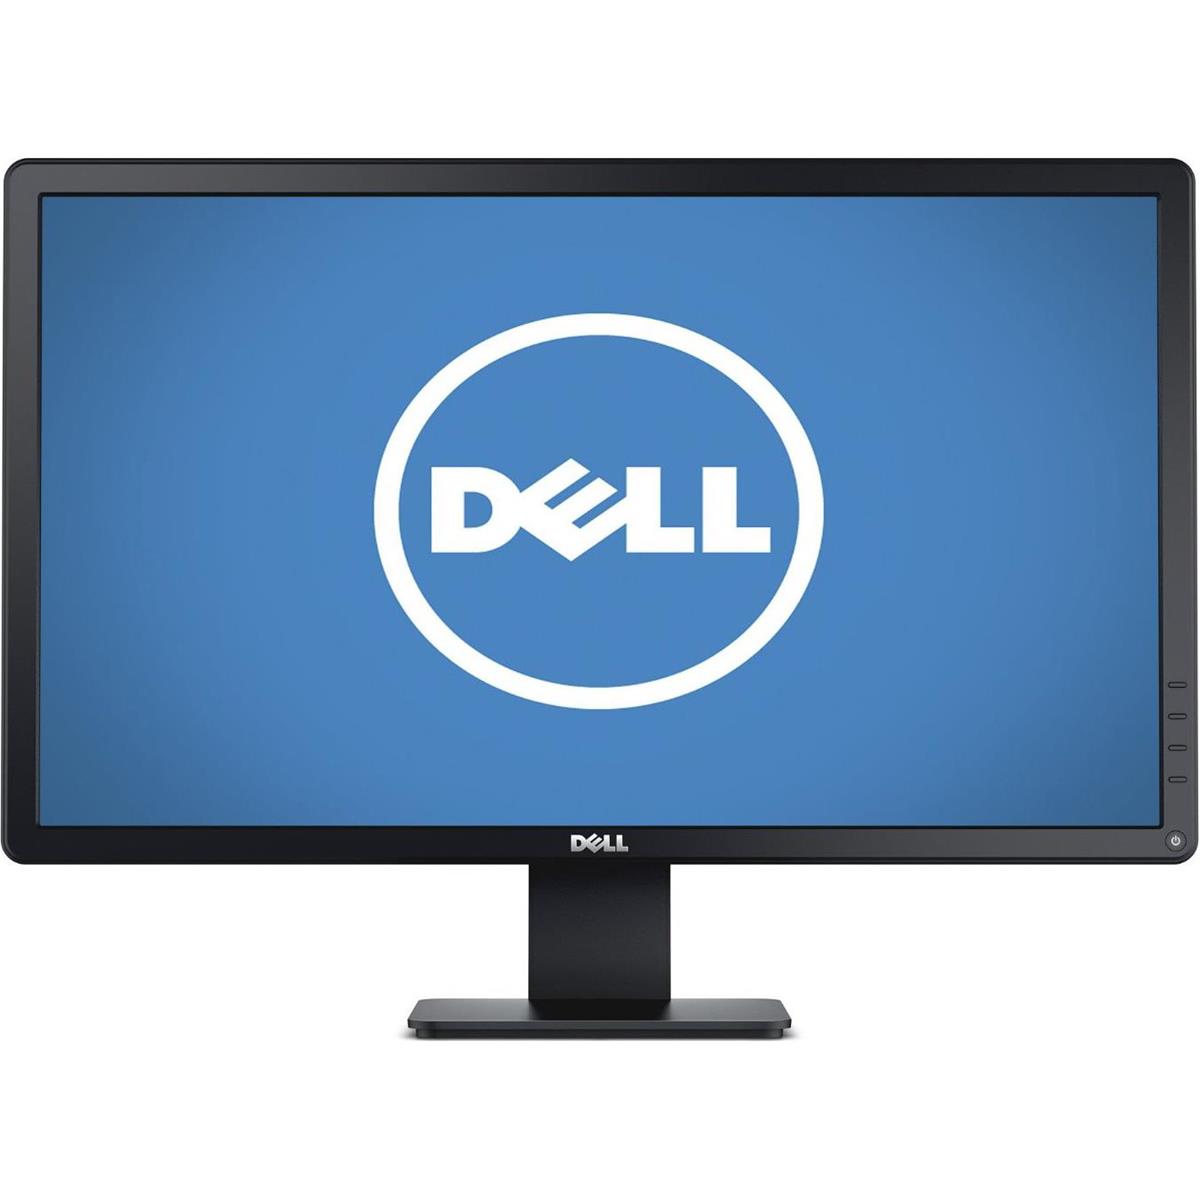 24" Full HD 1080p Widescreen LED Monitor with DVI Cable - Dell E2414H